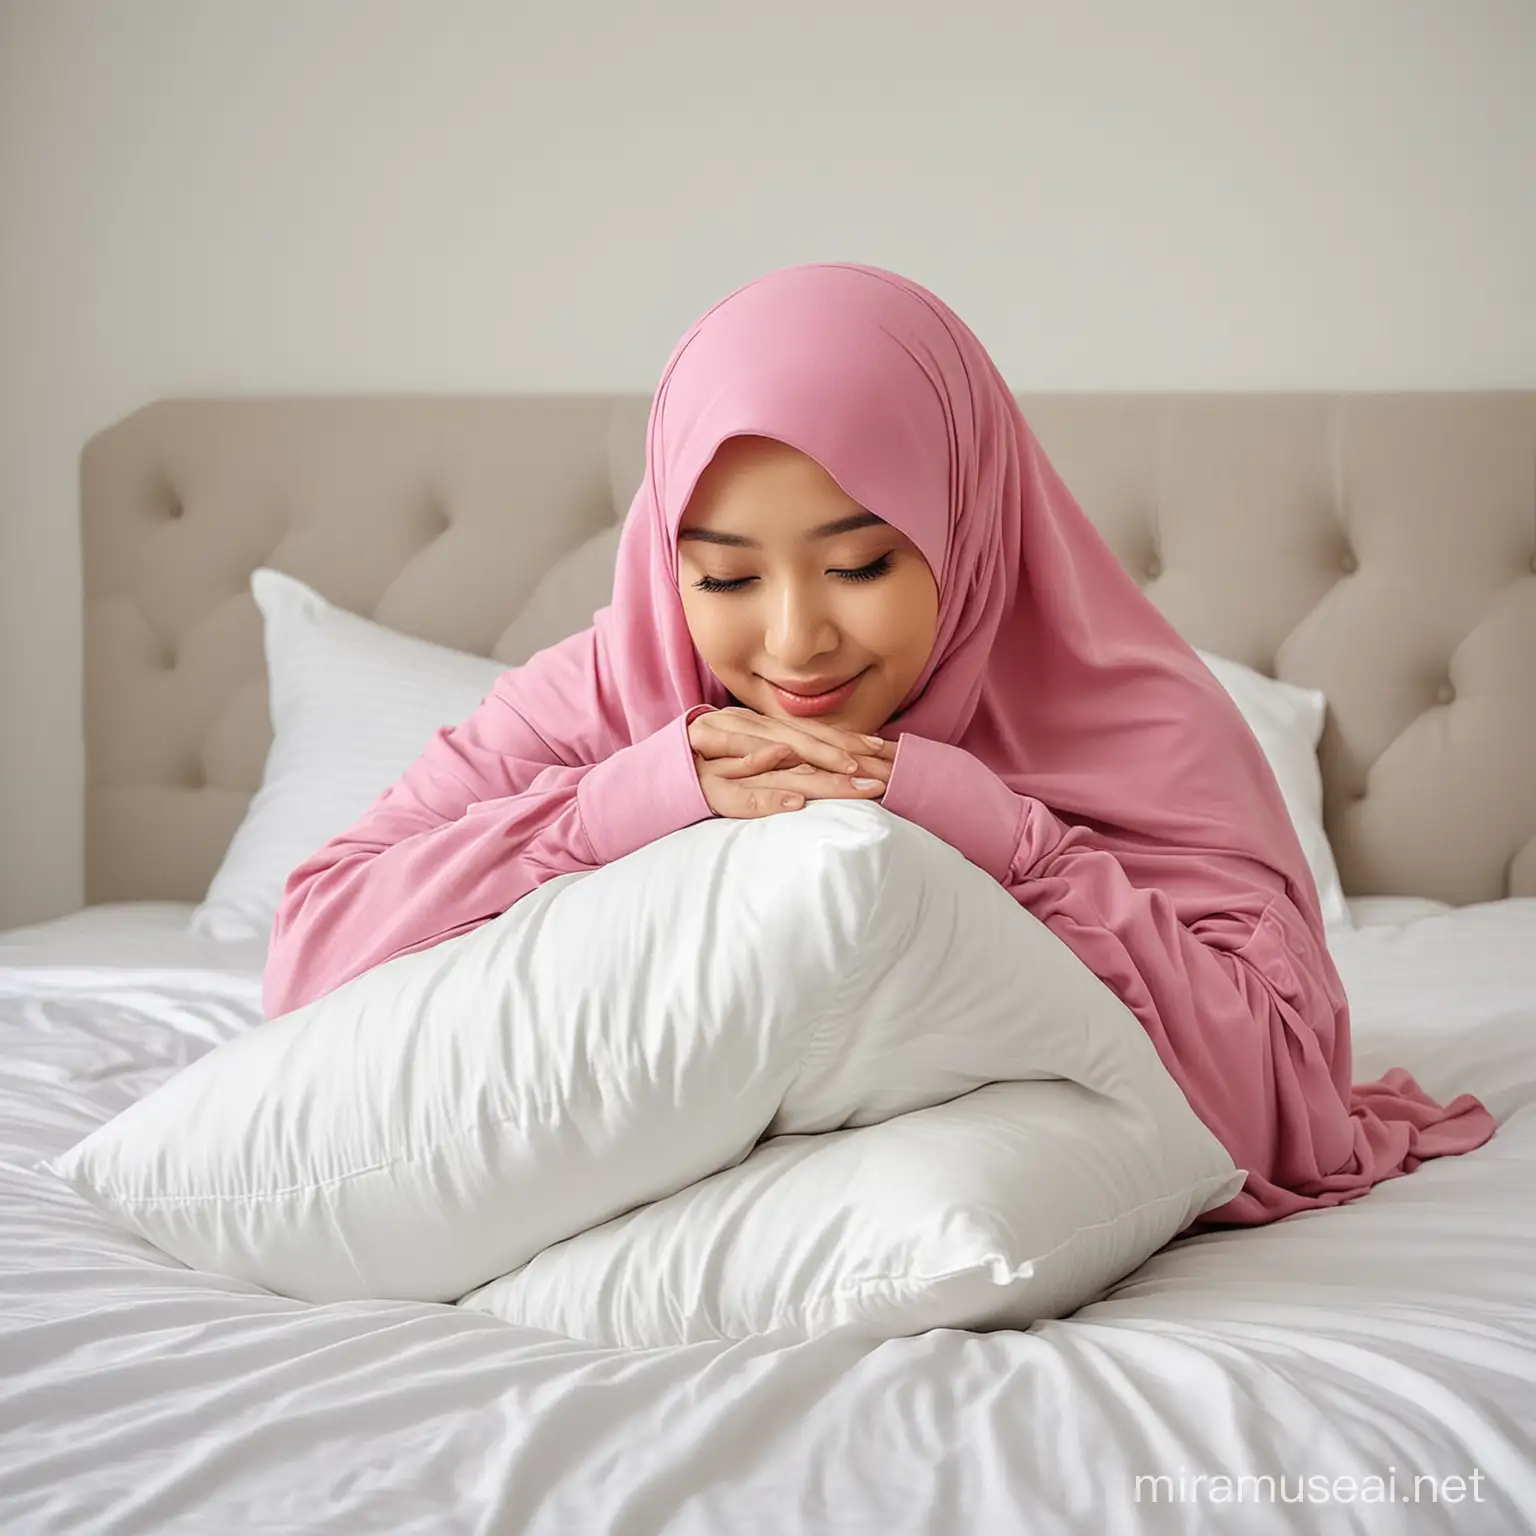 asian hijab girl hug a pillow in bed